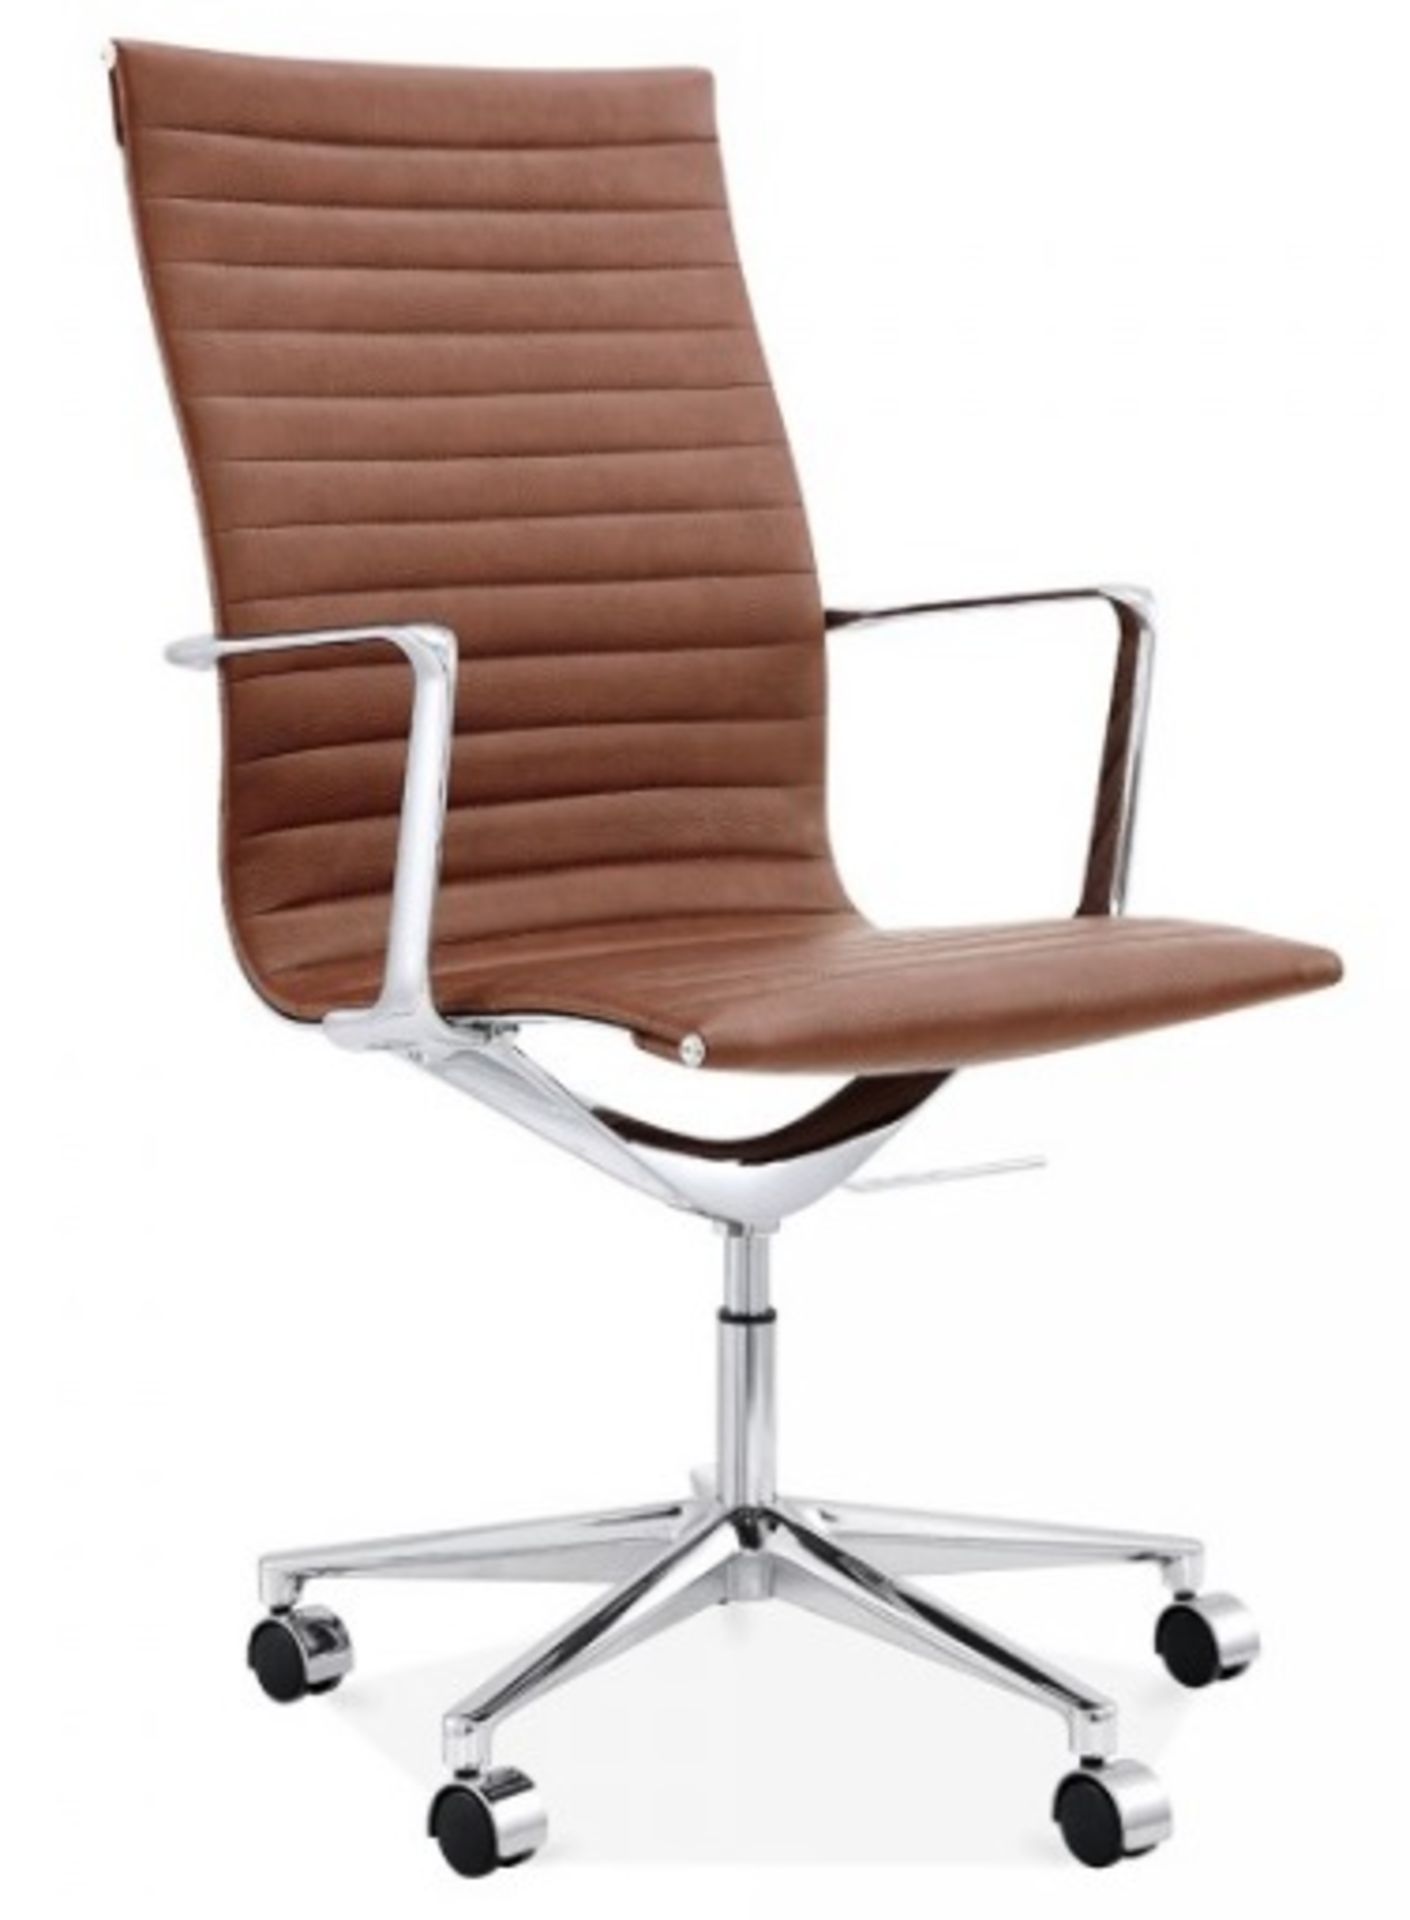 1 x LINEAR Eames-Inspired Ribbed High Back Office Swivel Chair In Brown Leather- New / Unboxed Stock